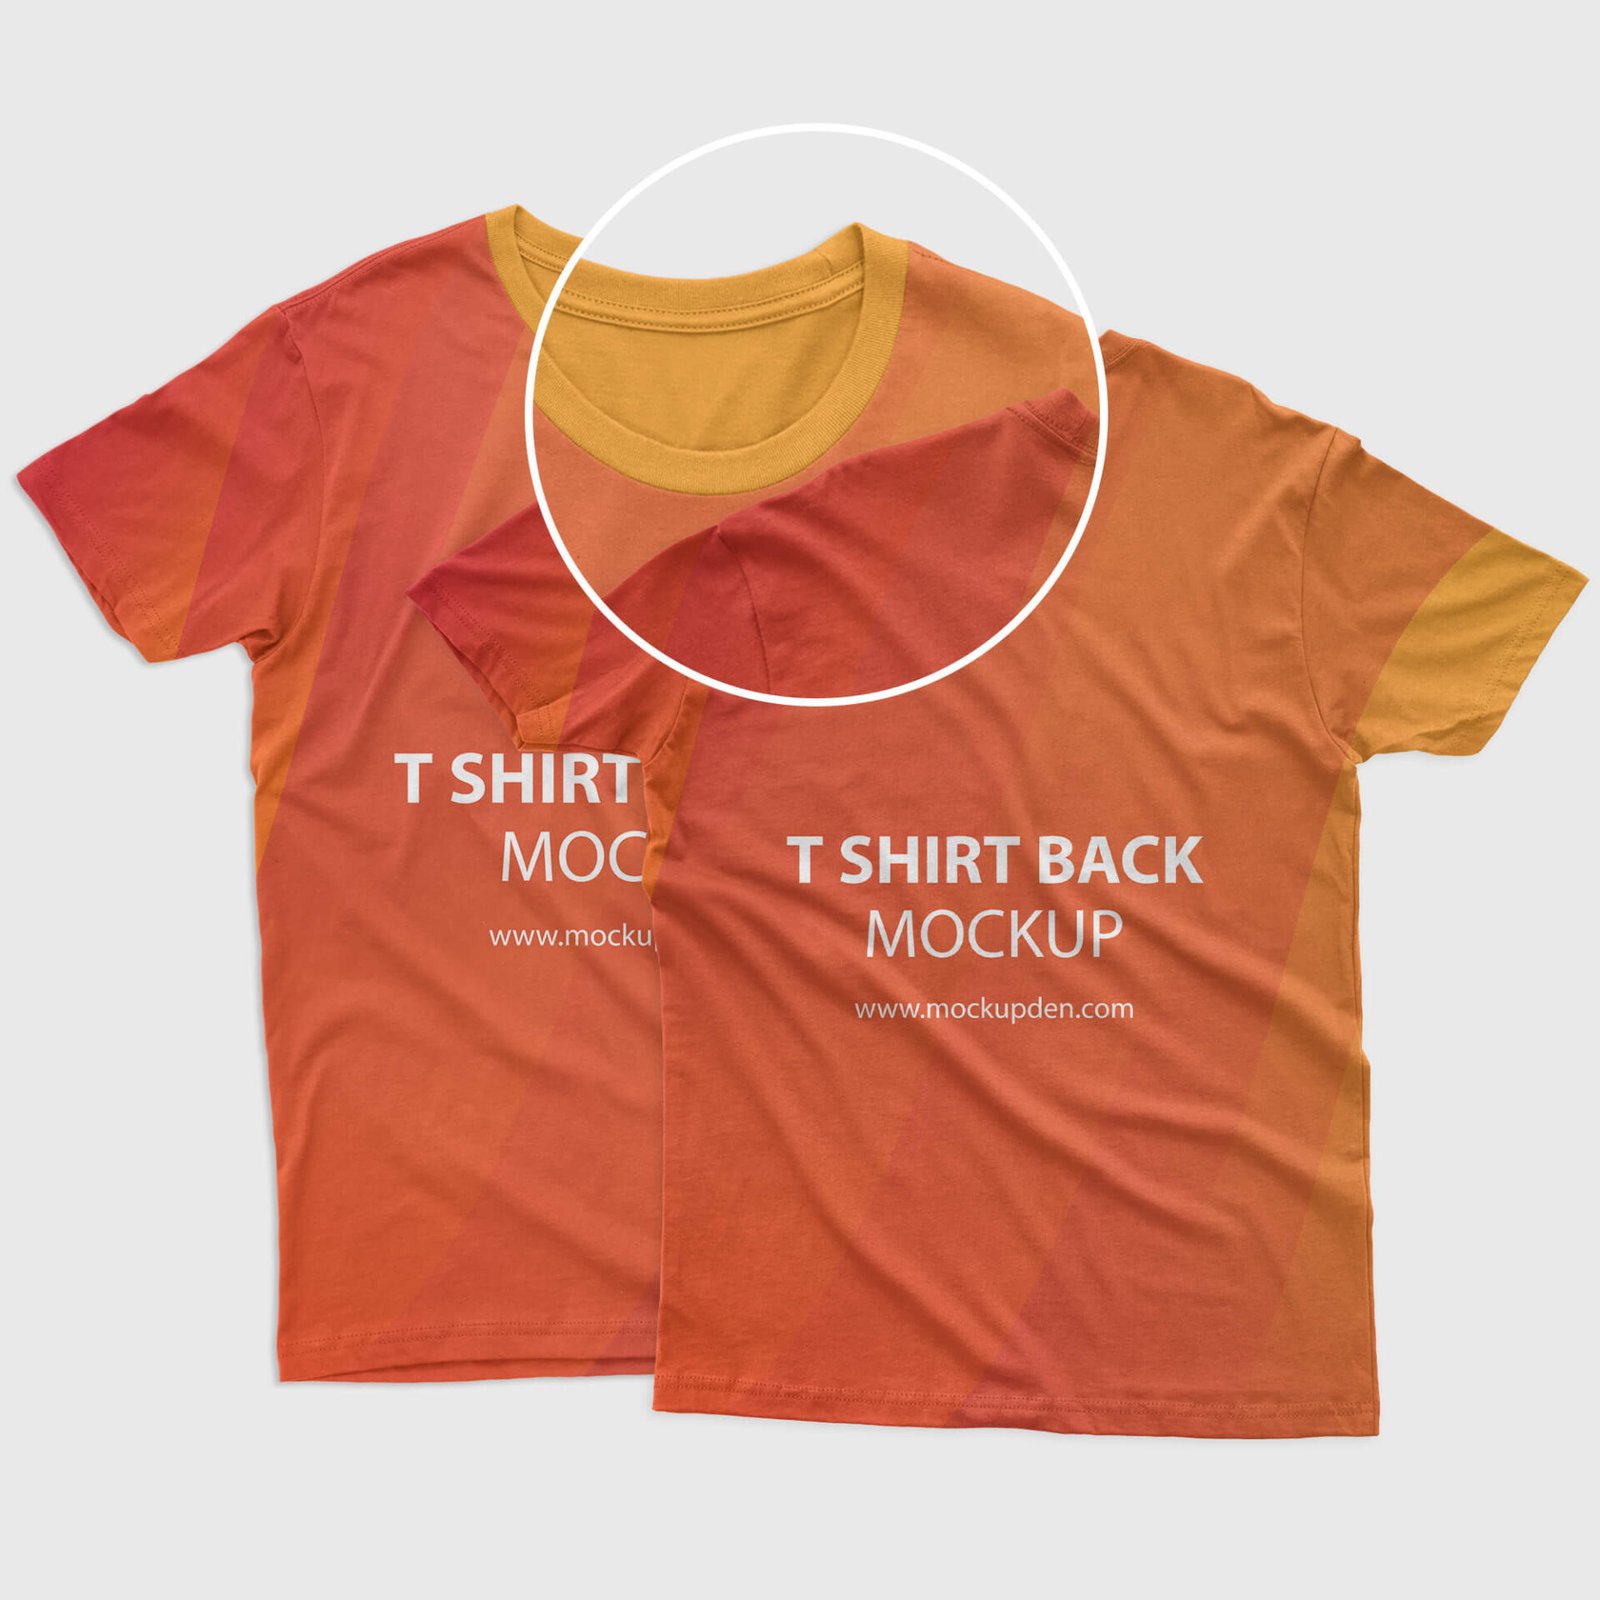 Download 787 T Shirt Back Mockup Psd Free Easy To Edit